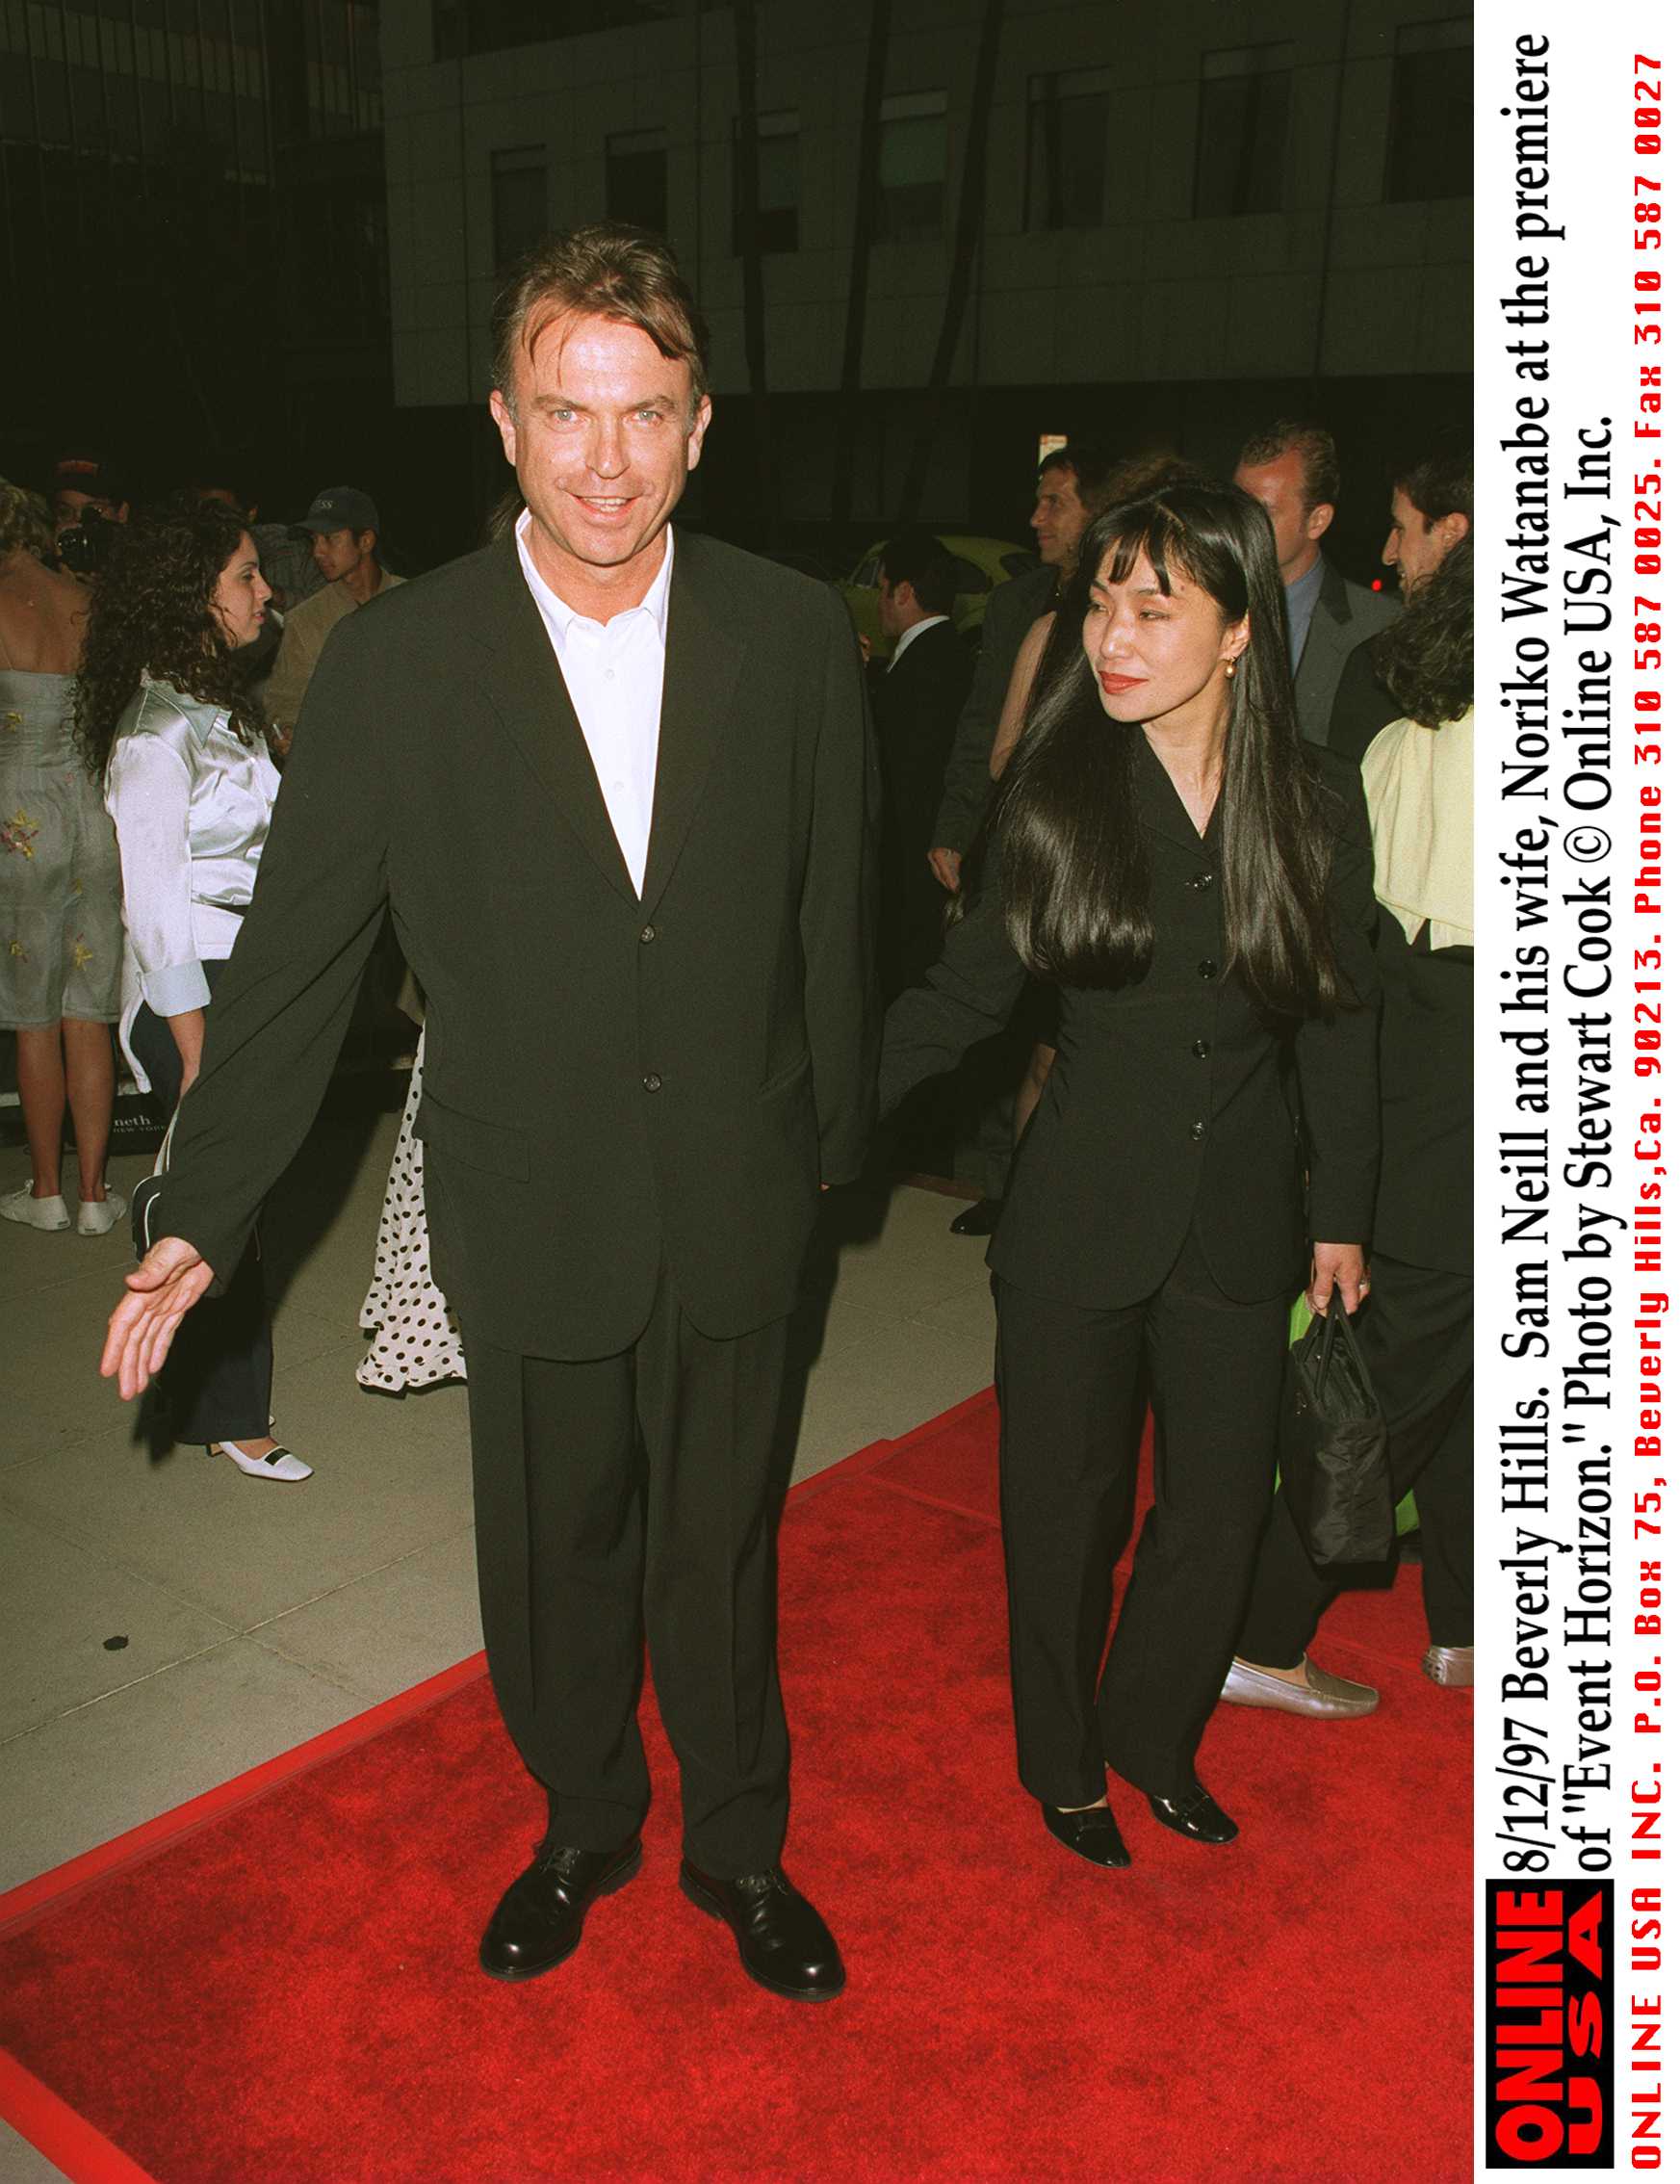 Sam Neill and Noriko Watanabe at the premiere of "Event Horizon" on August 13, 1997, in Beverly Hills, California. | Source: Getty Images